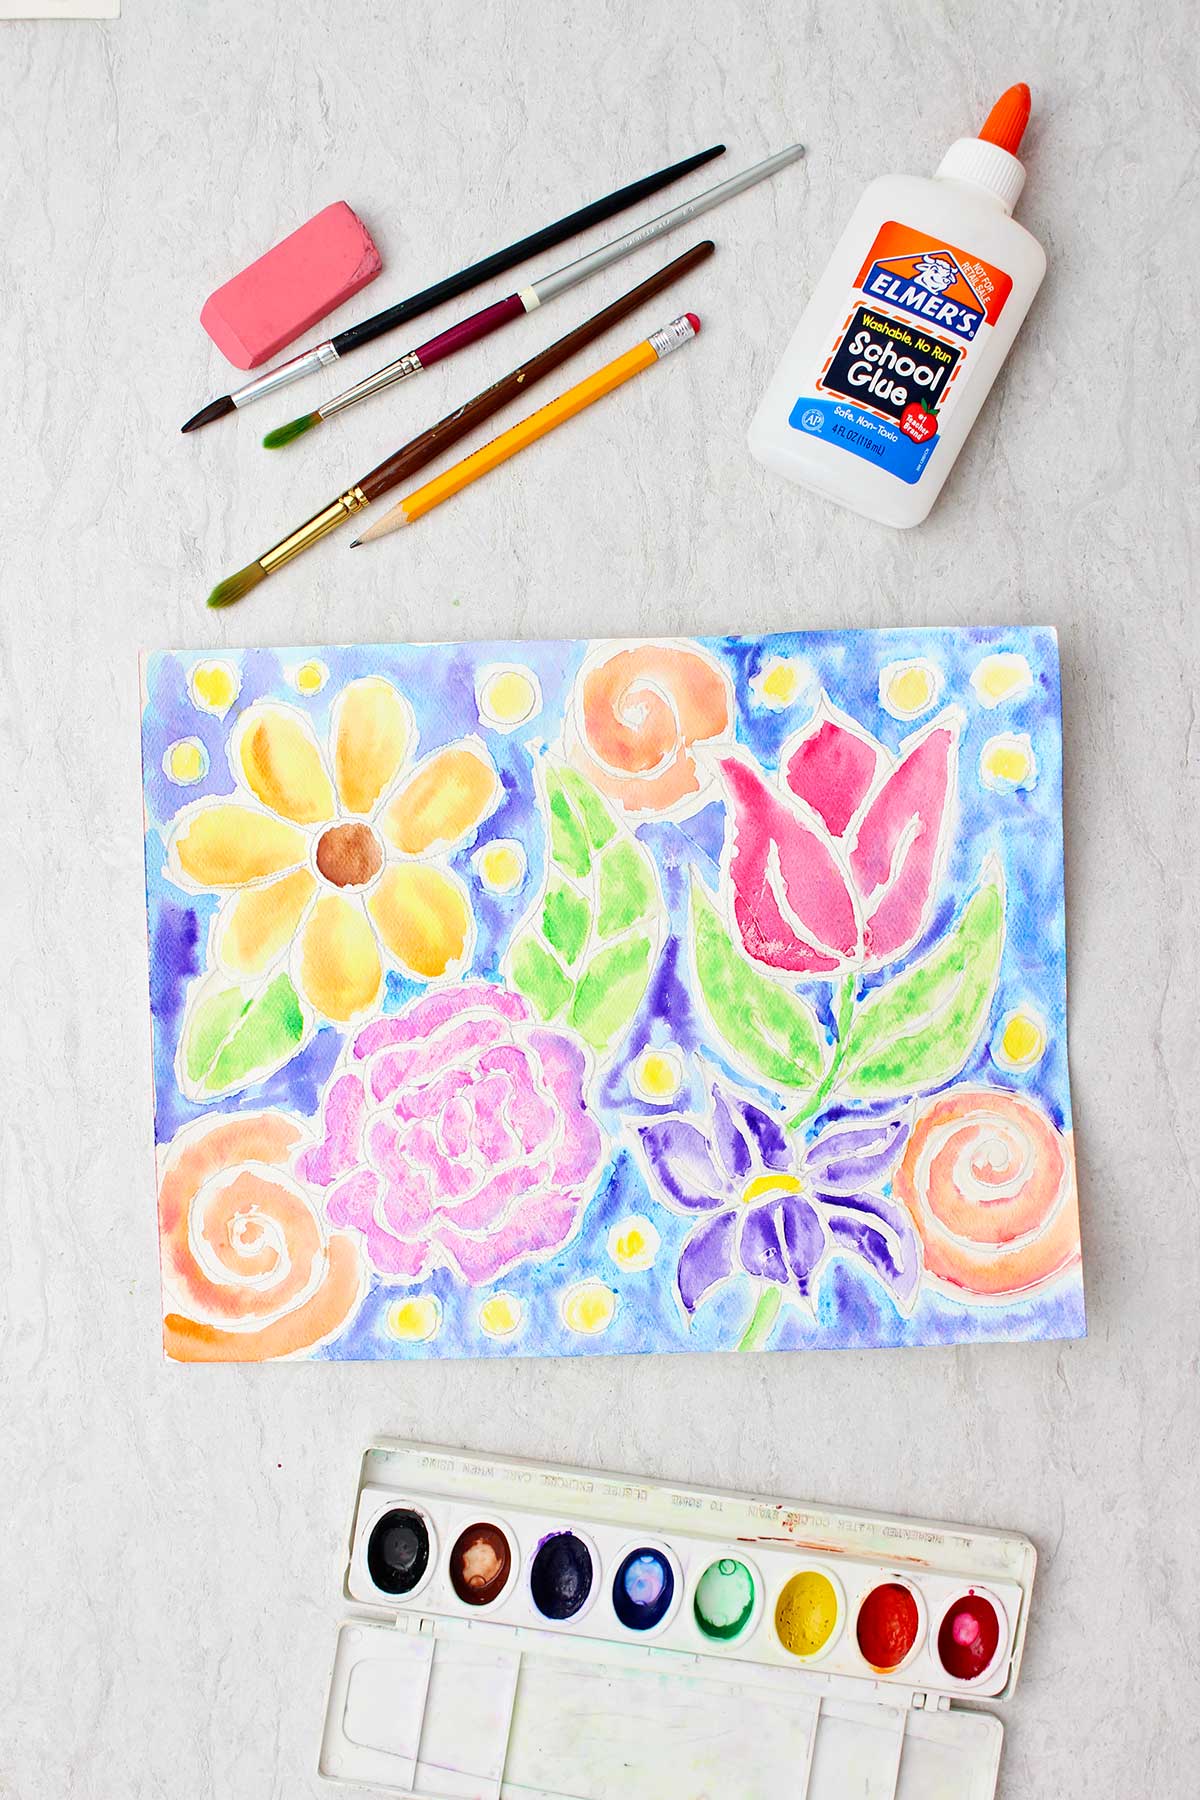 Completed glue line painting of colorful flowers with blue background with glue, brush, pencil, eraser and paints near by.